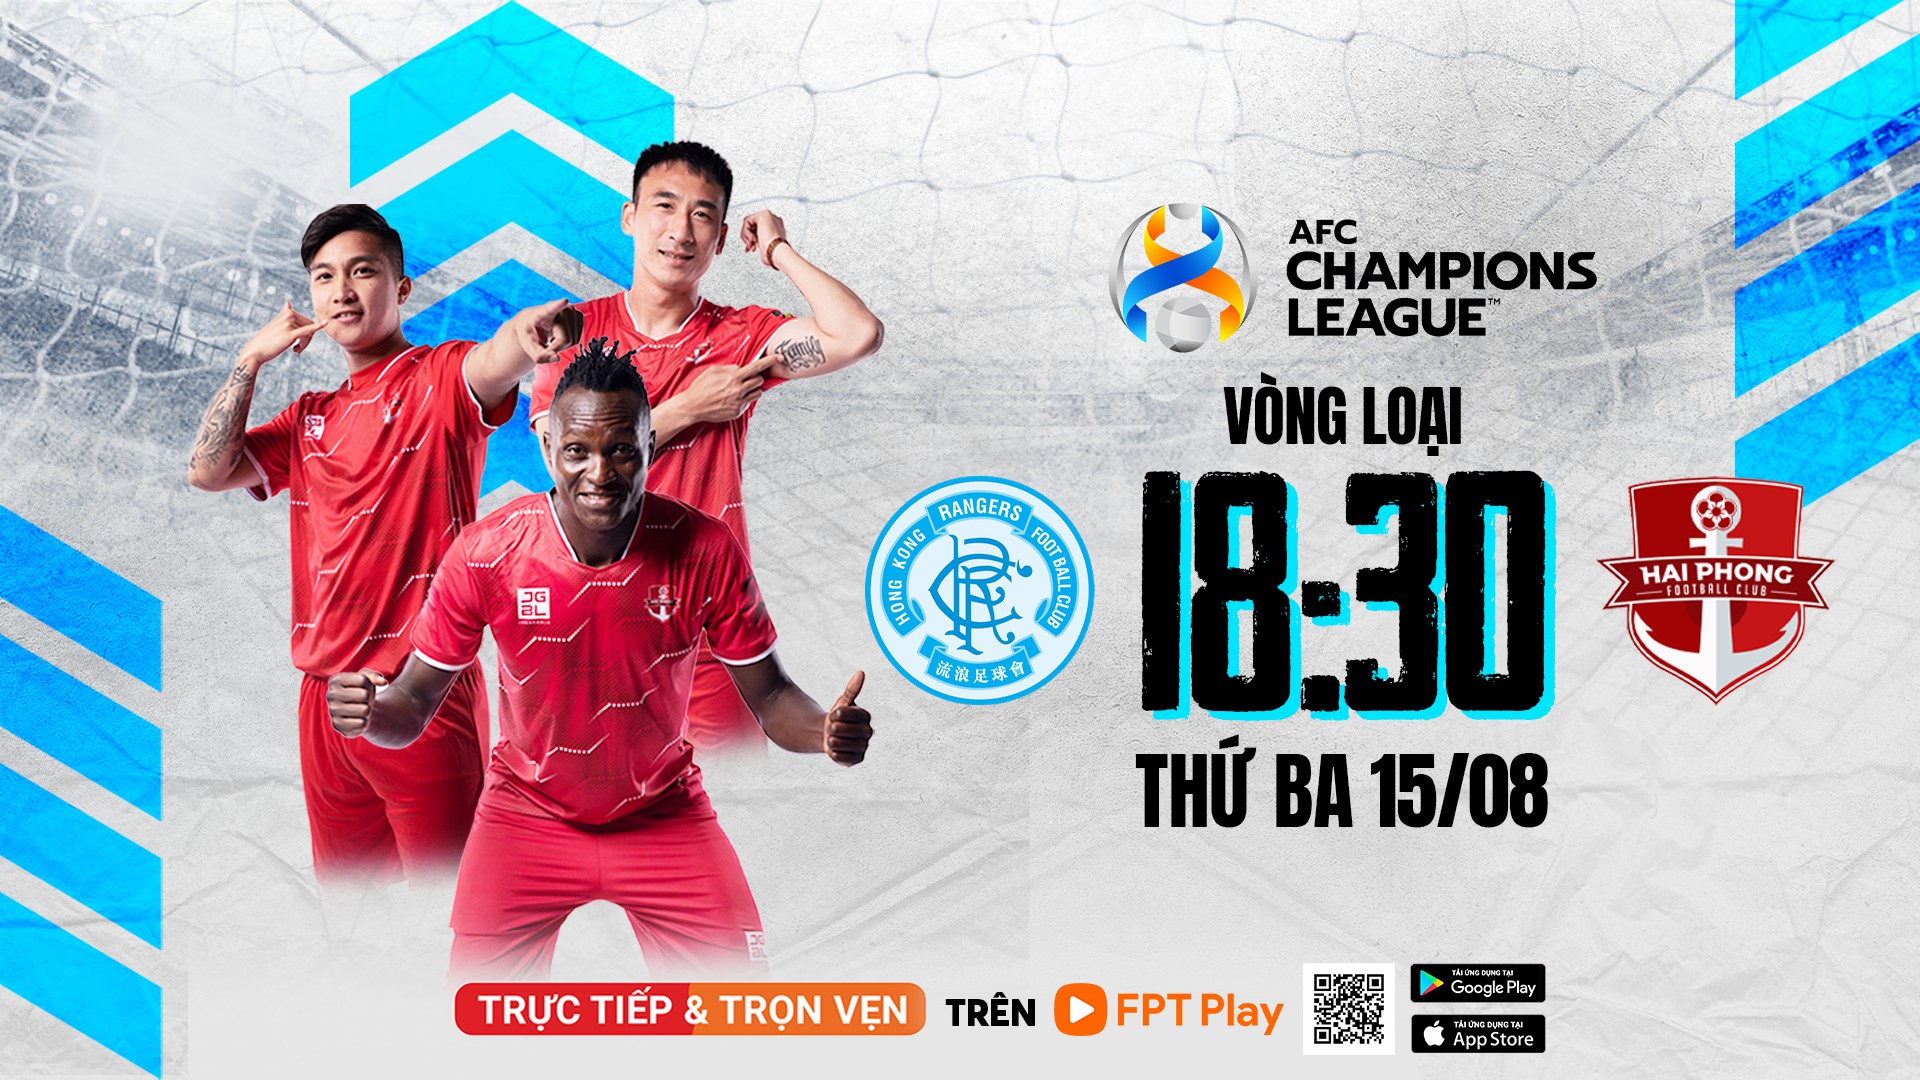 fpt play, afc champions league, rangers, hải phòng